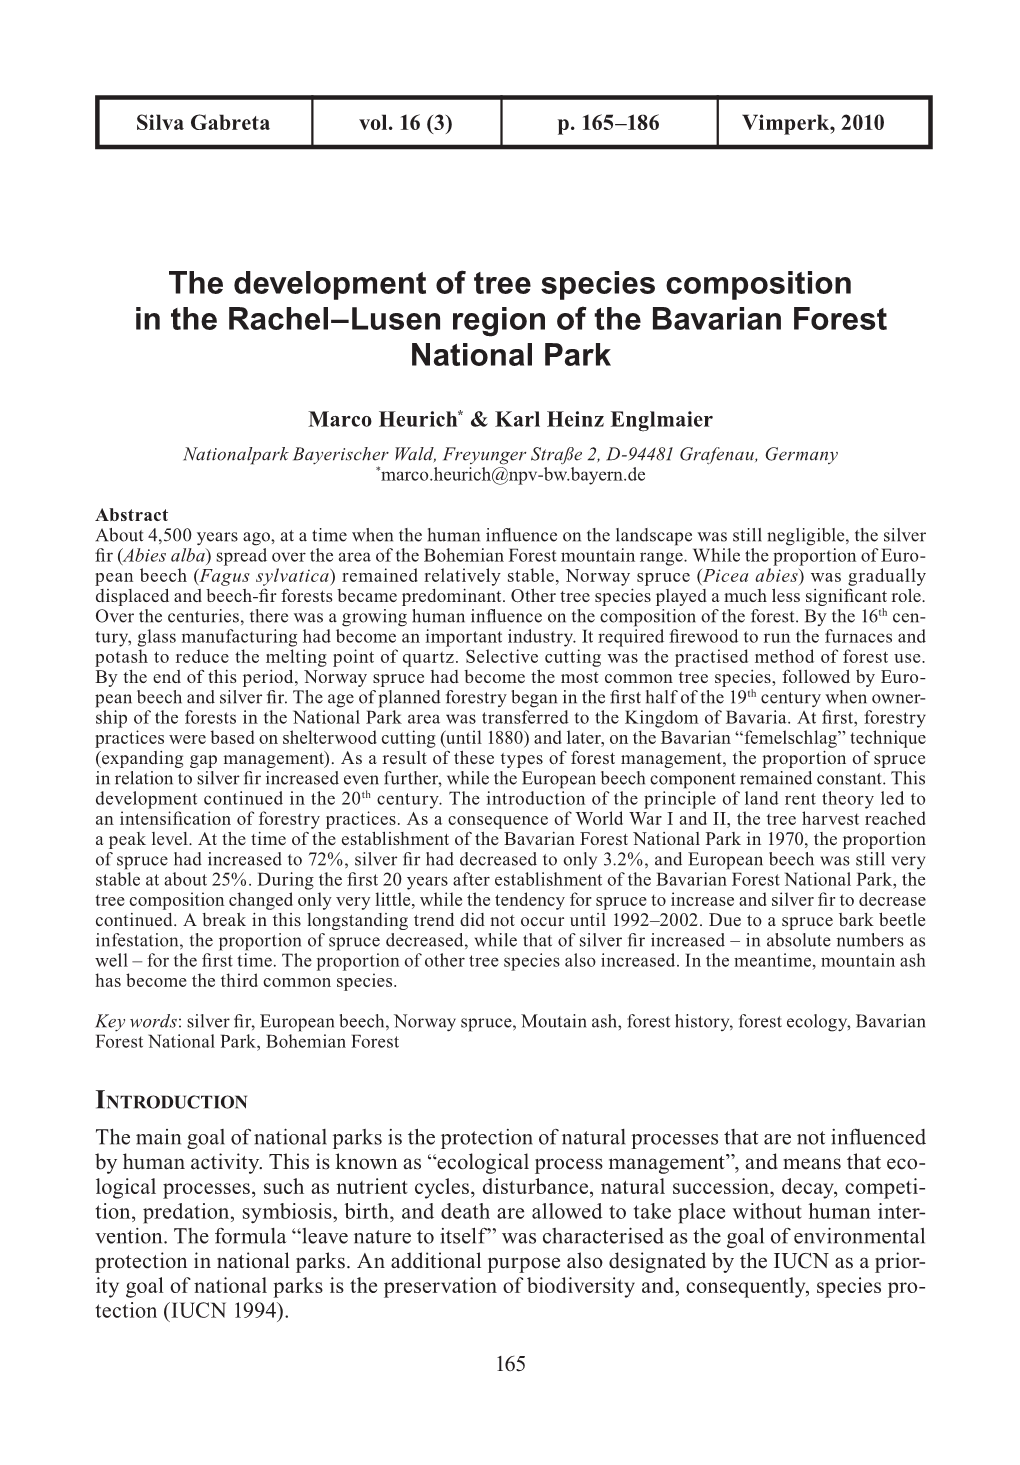 The Development of Tree Species Composition in the Rachel–Lusen Region of the Bavarian Forest National Park